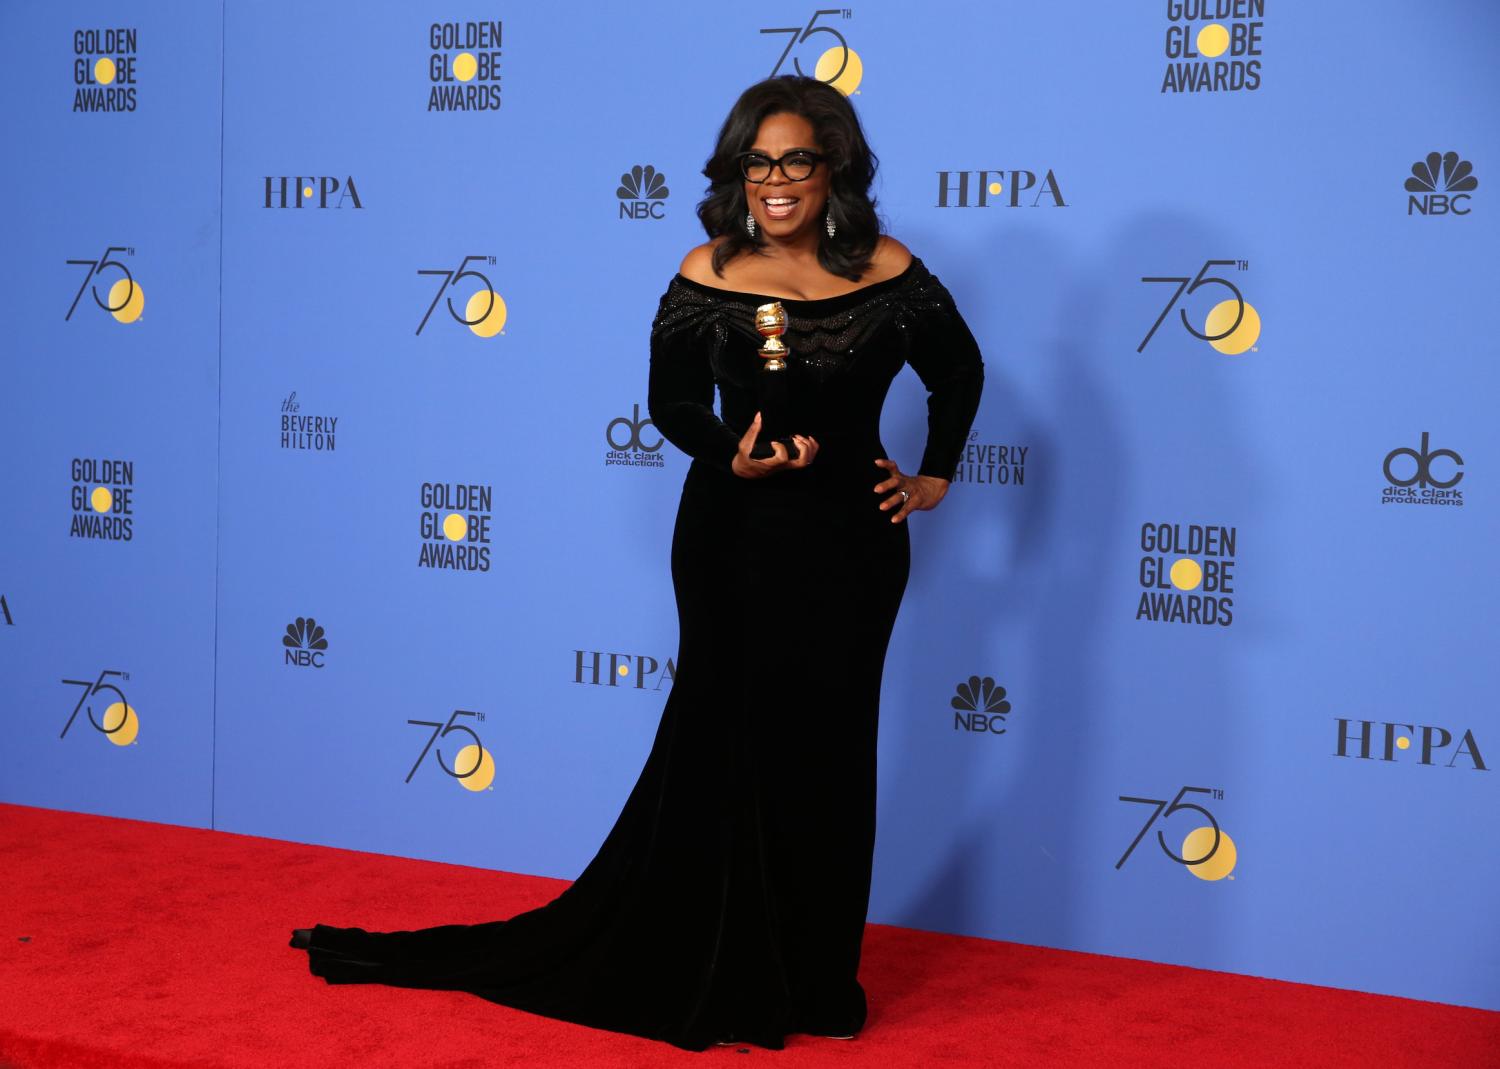 75th Golden Globe Awards ñ Photo Room ñ Beverly Hills, California, U.S., 07/01/2018 ñ Oprah Winfrey poses backstage with her Cecil B. DeMille Award. REUTERS/Lucy Nicholson - HP1EE1809MAUY